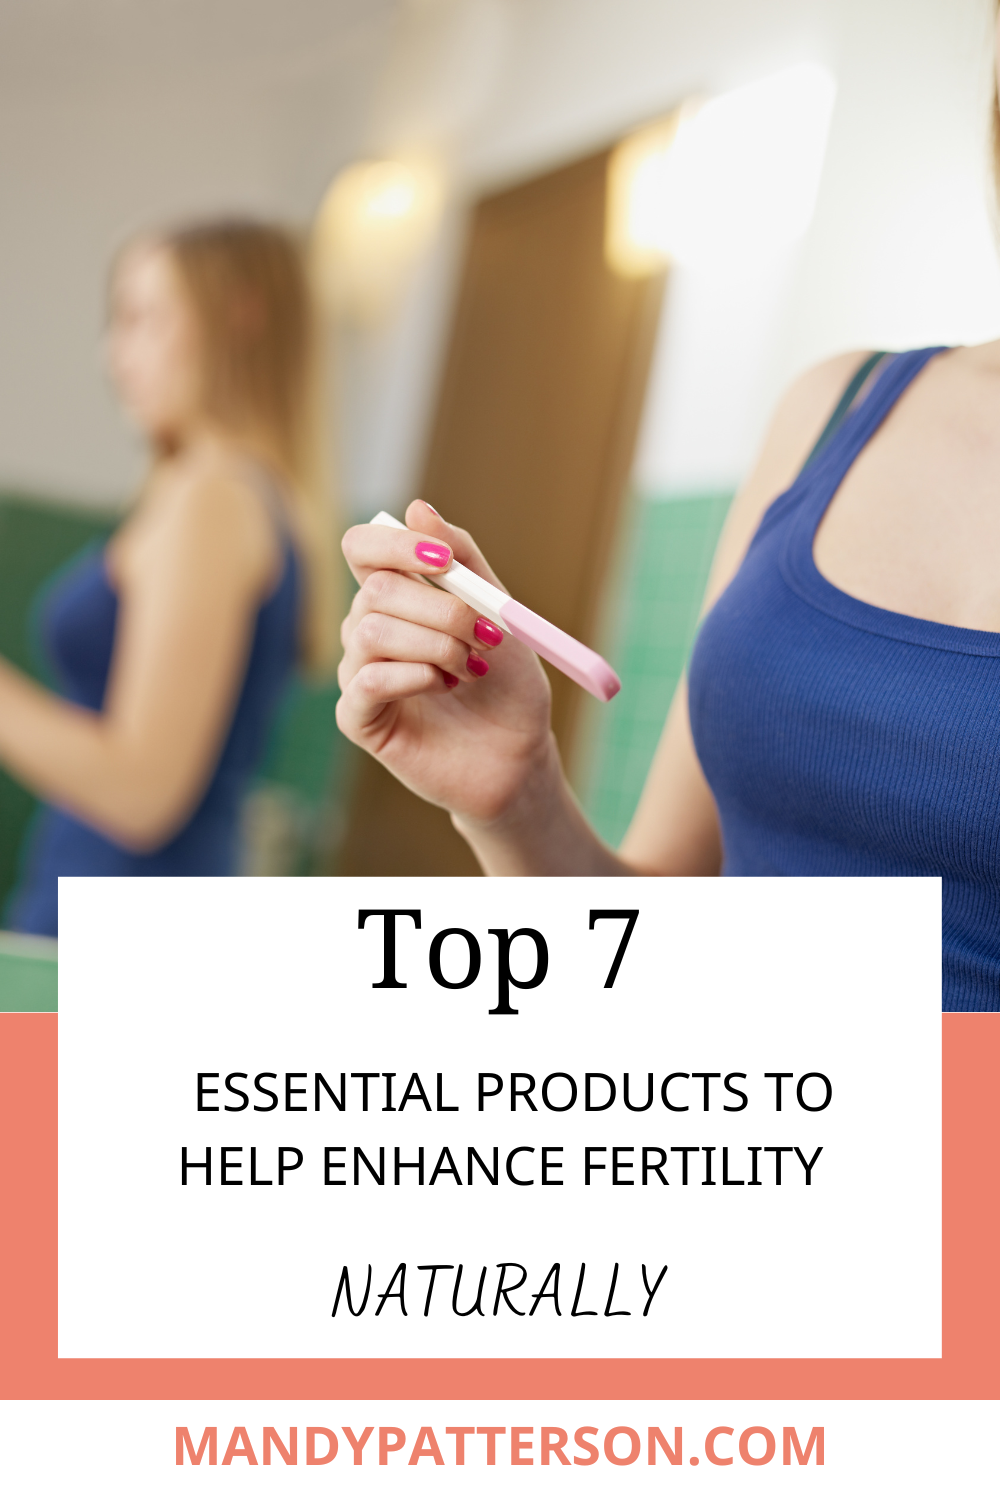 Fertility products to enhance fertility naturally